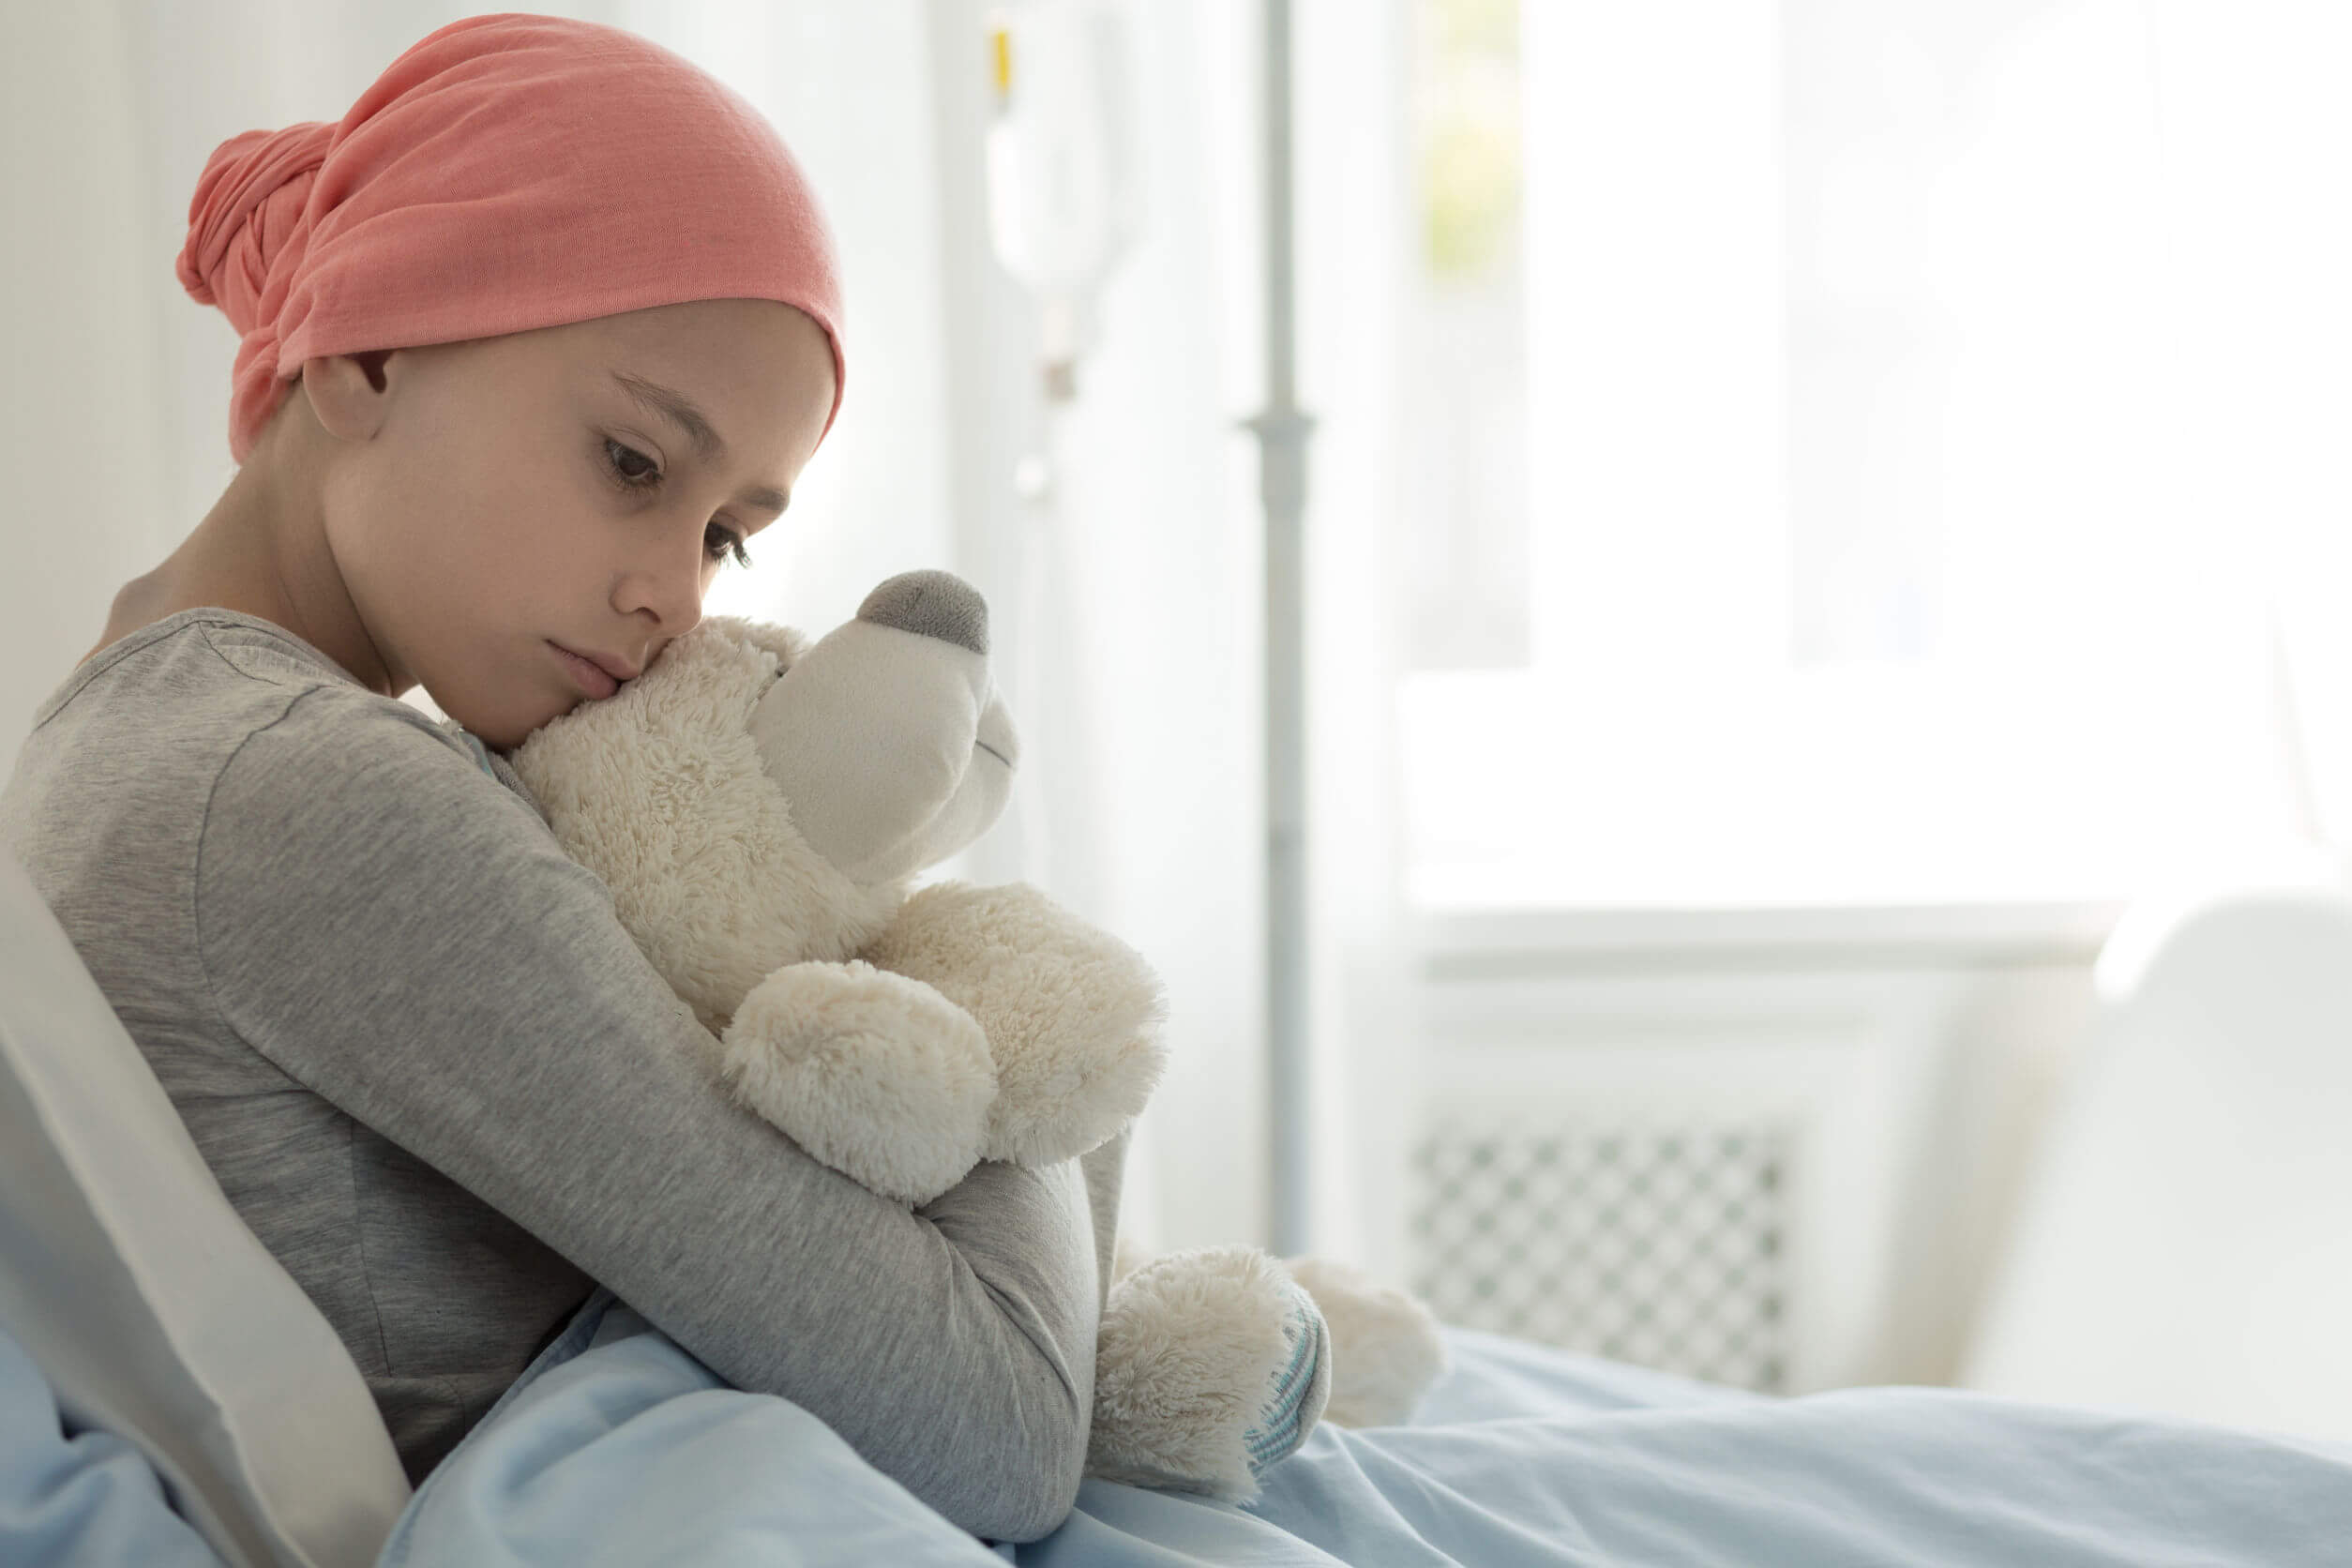 Leukemia is more easily cured in children.